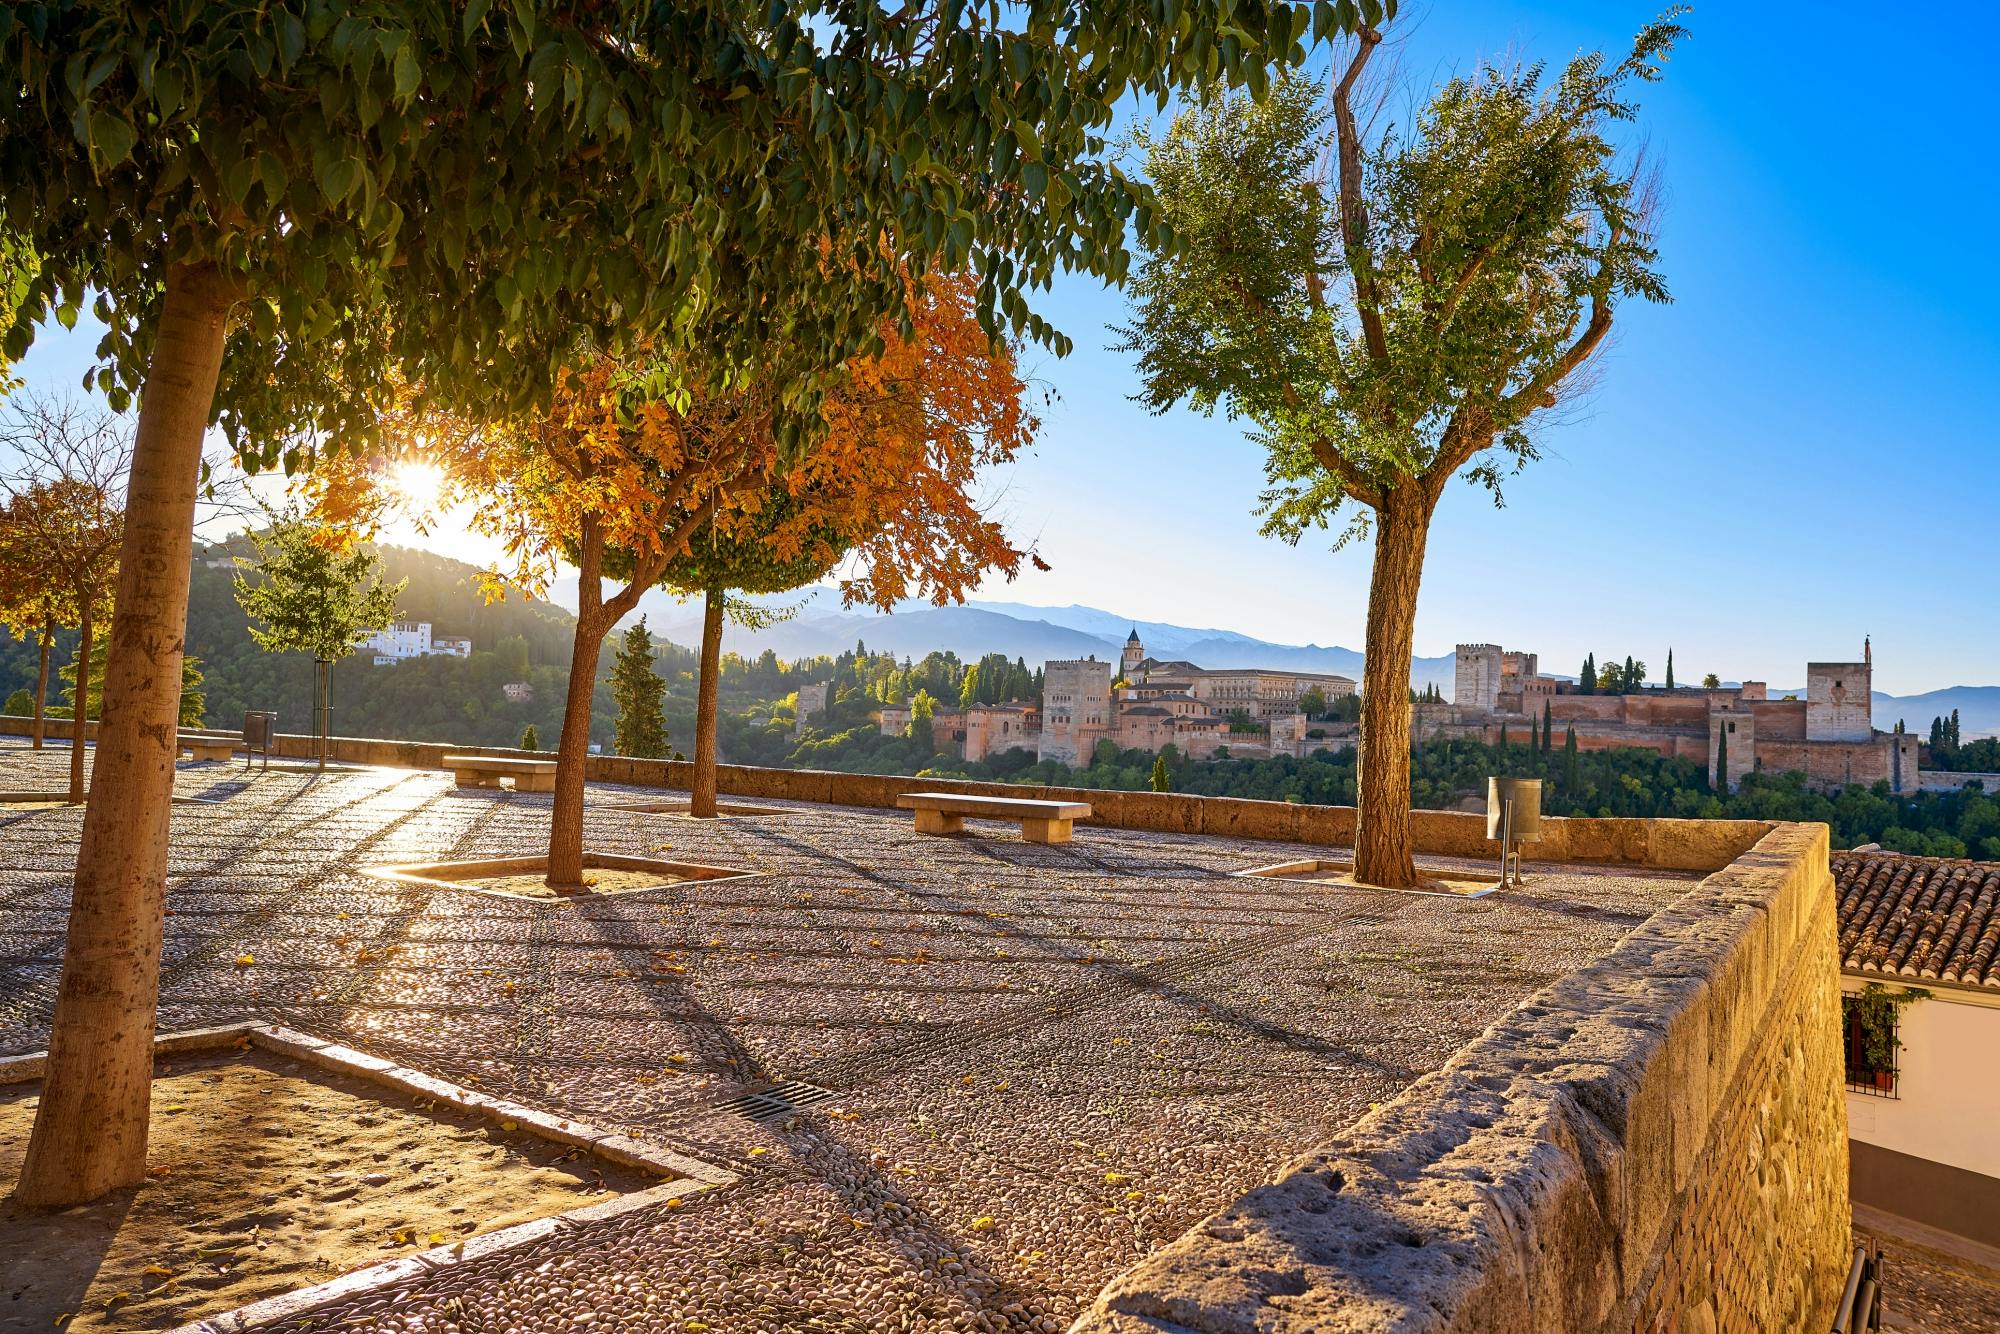 Day trip to Granada from Malaga at your leisure